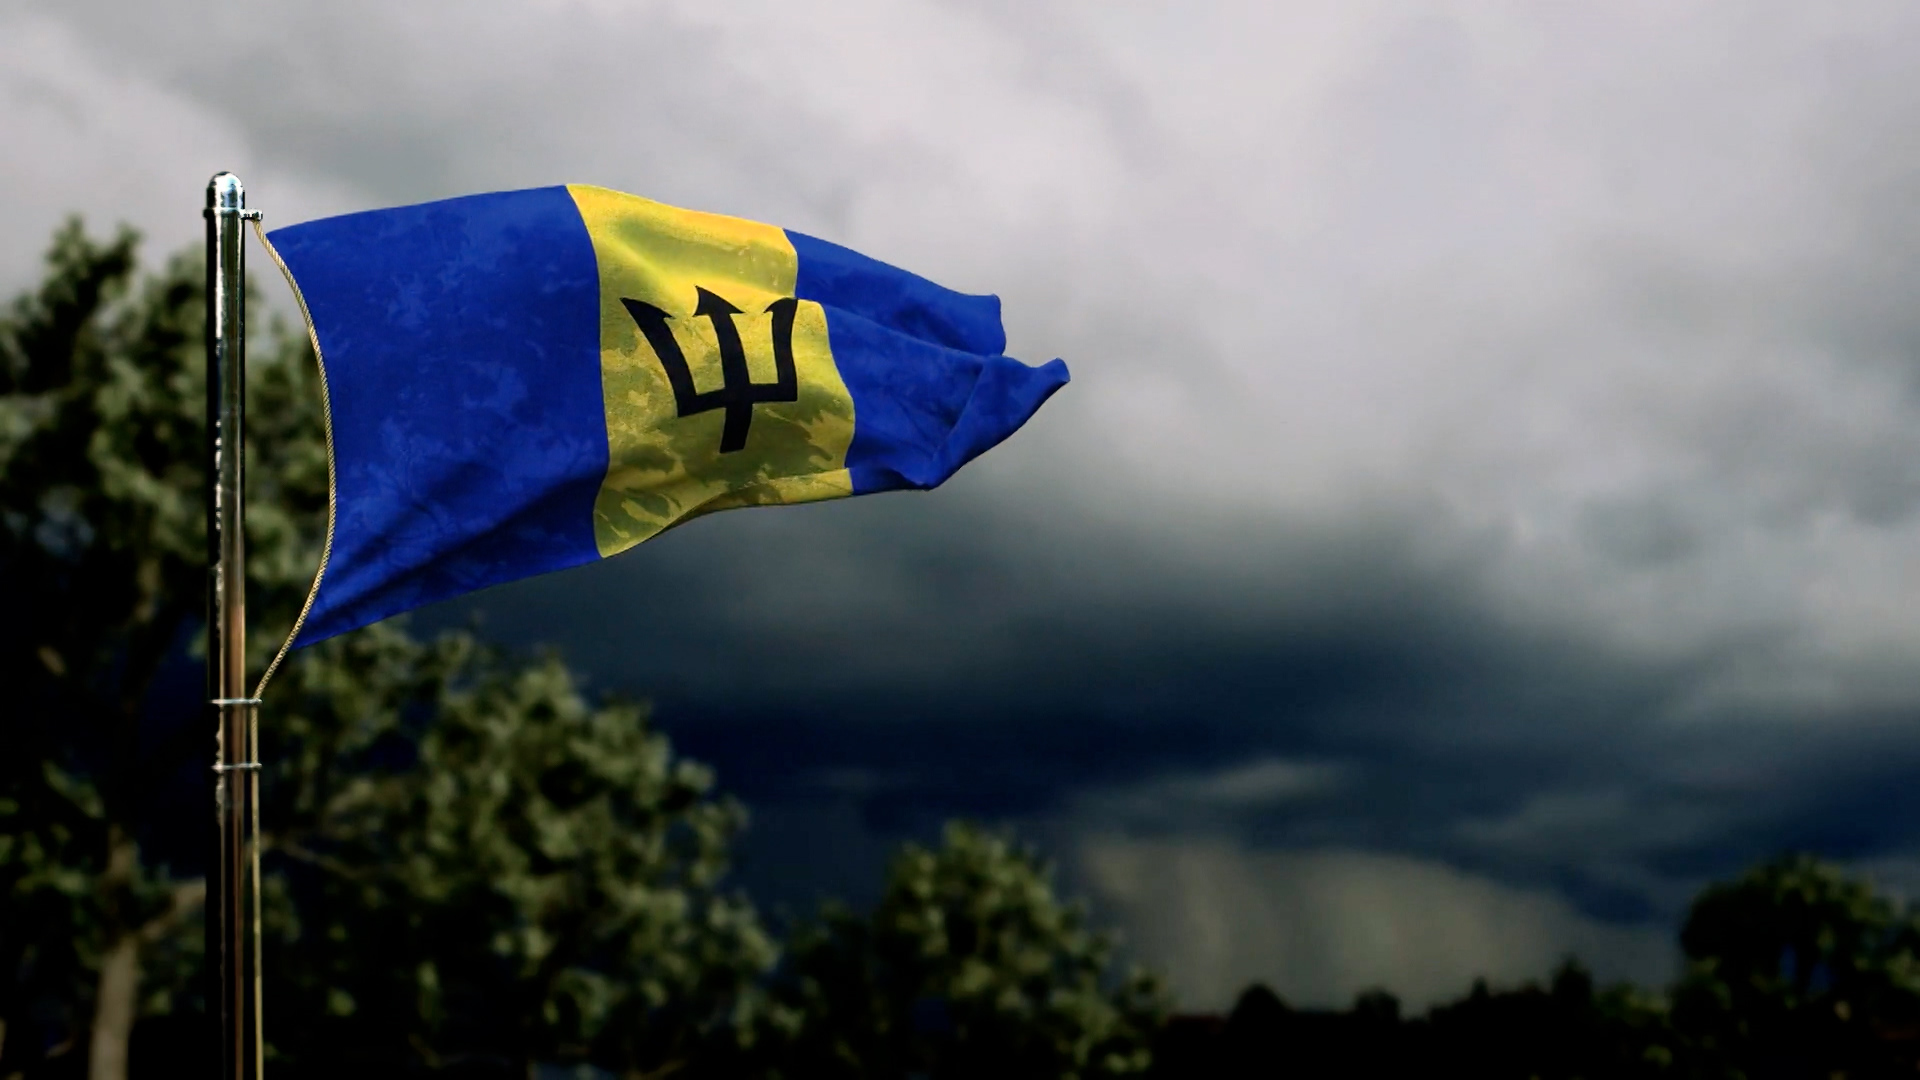 This candid photo shows the Flag of Barbados and an incoming rainstorm.